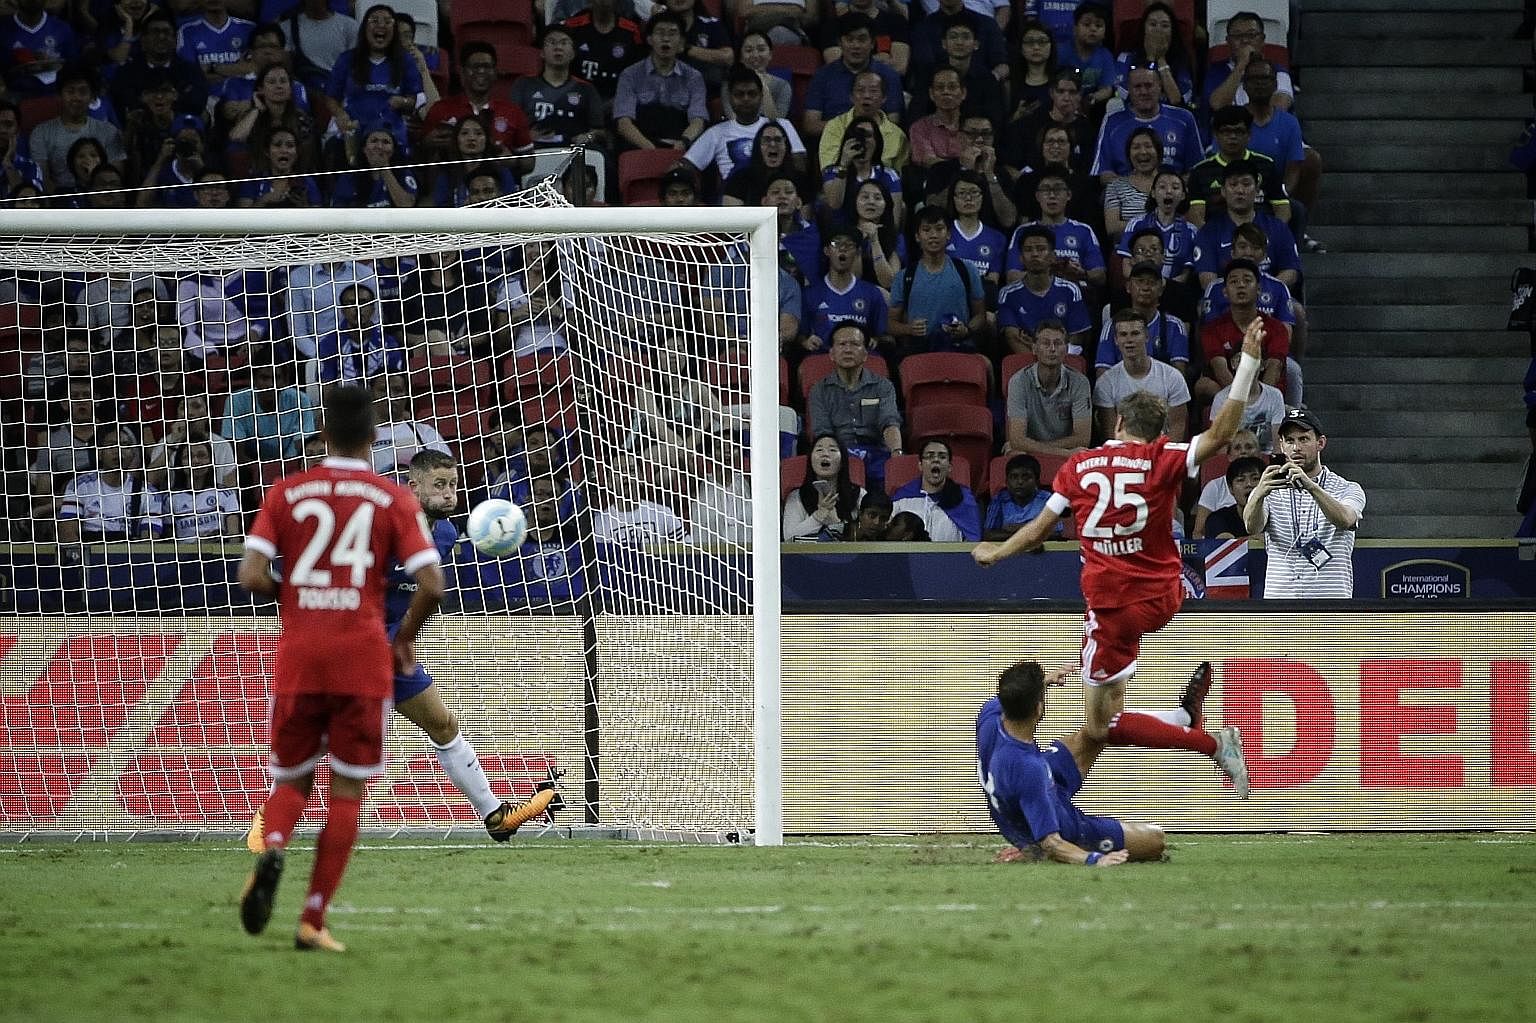 Bayern Munich forward Thomas Muller (jersey No. 25) slamming the ball home for his club's second goal in their 3-2 win over English Premier League champions Chelsea in the first match of the International Champions Cup at the National Stadium last ni